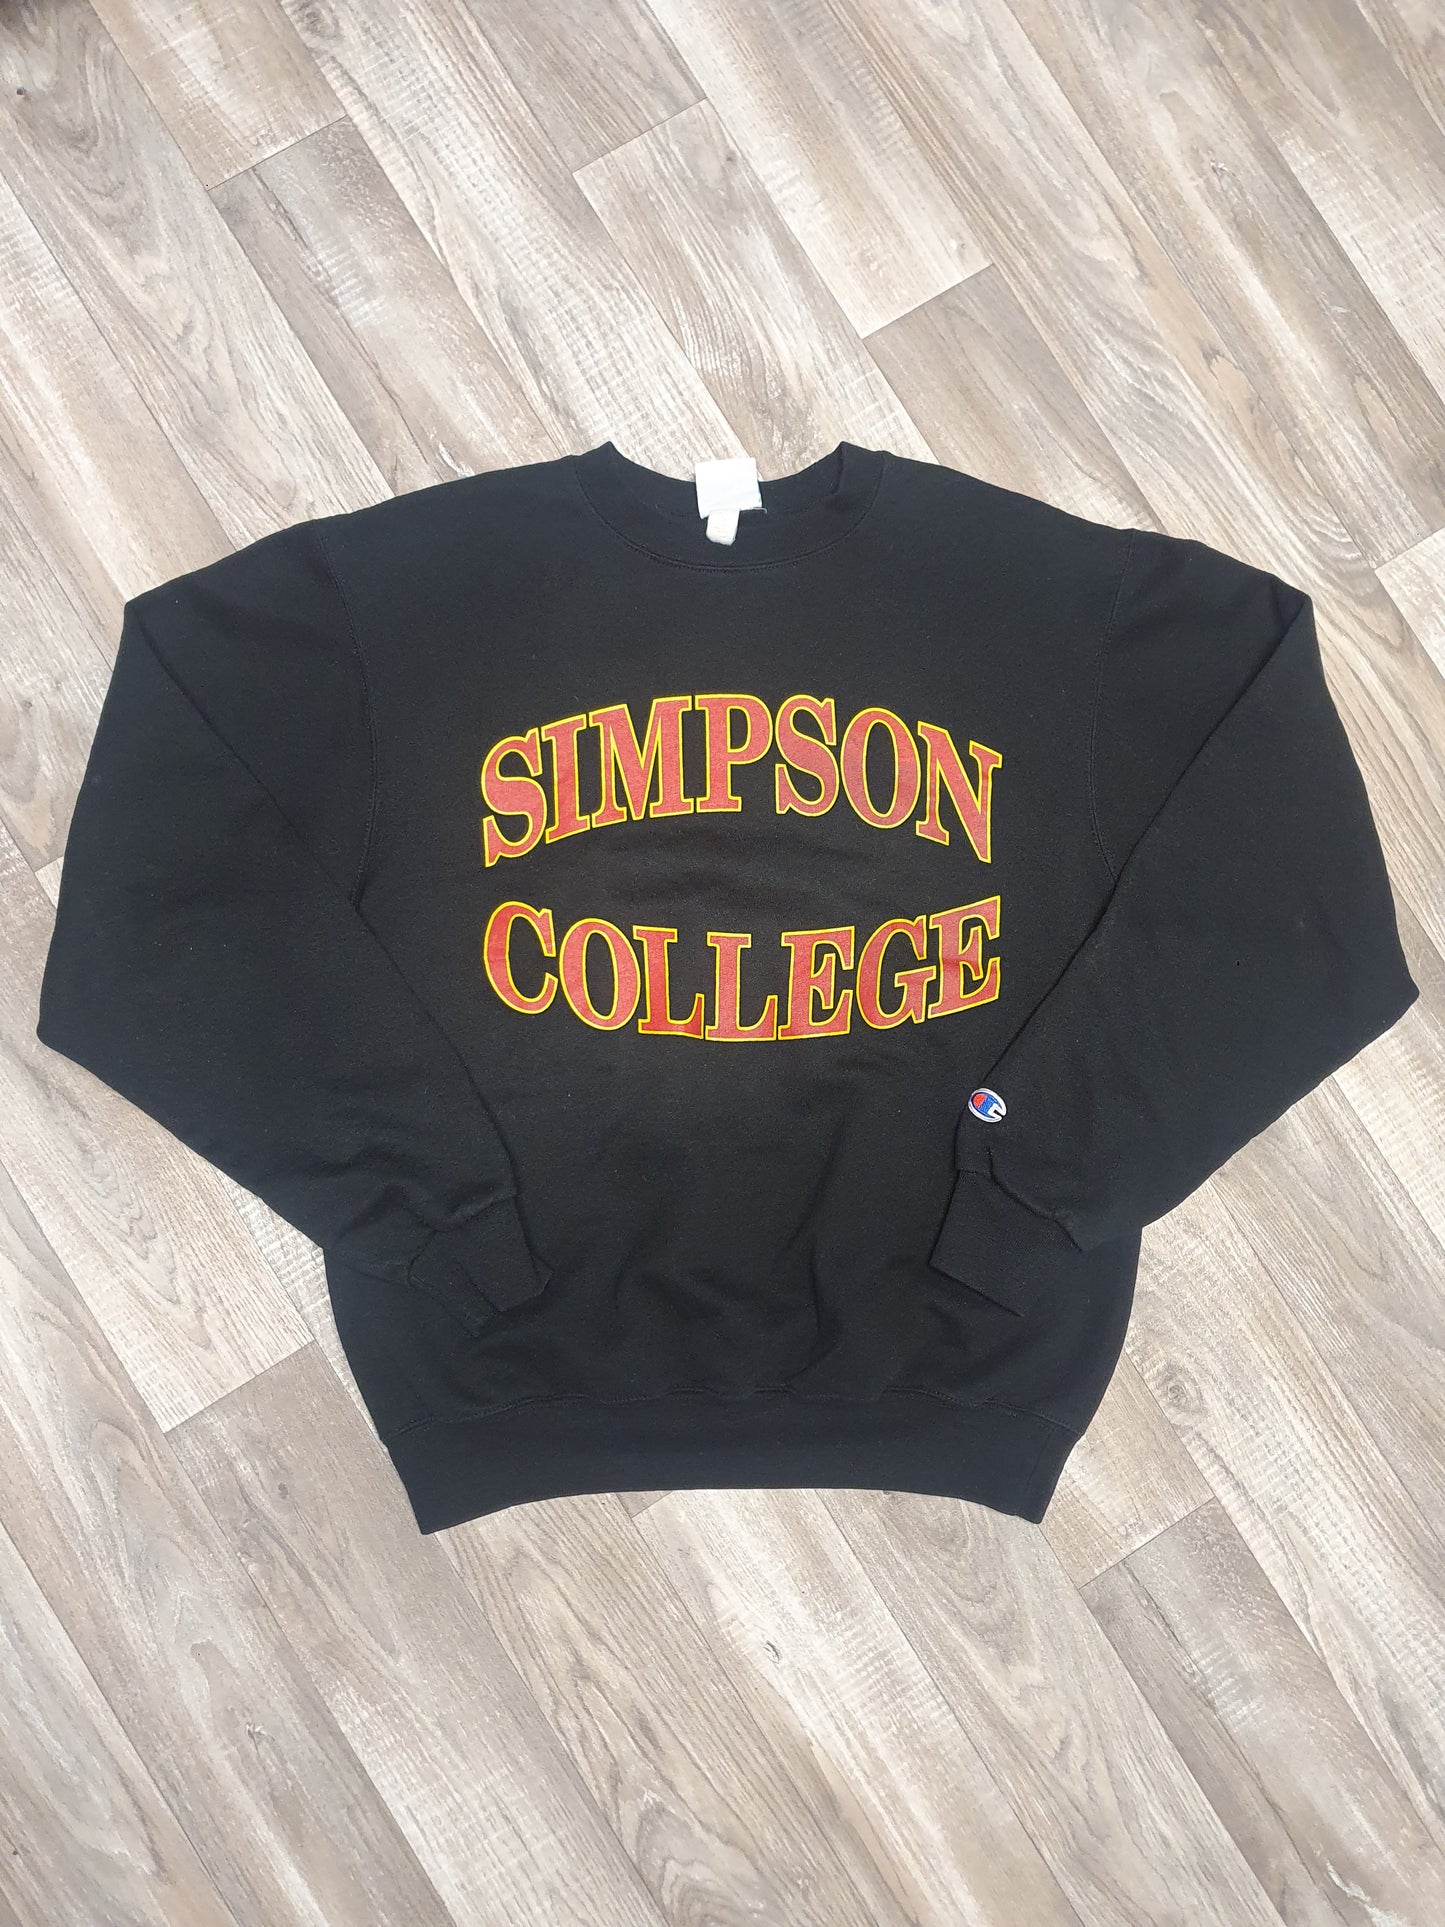 Simpson College Sweater Size Small